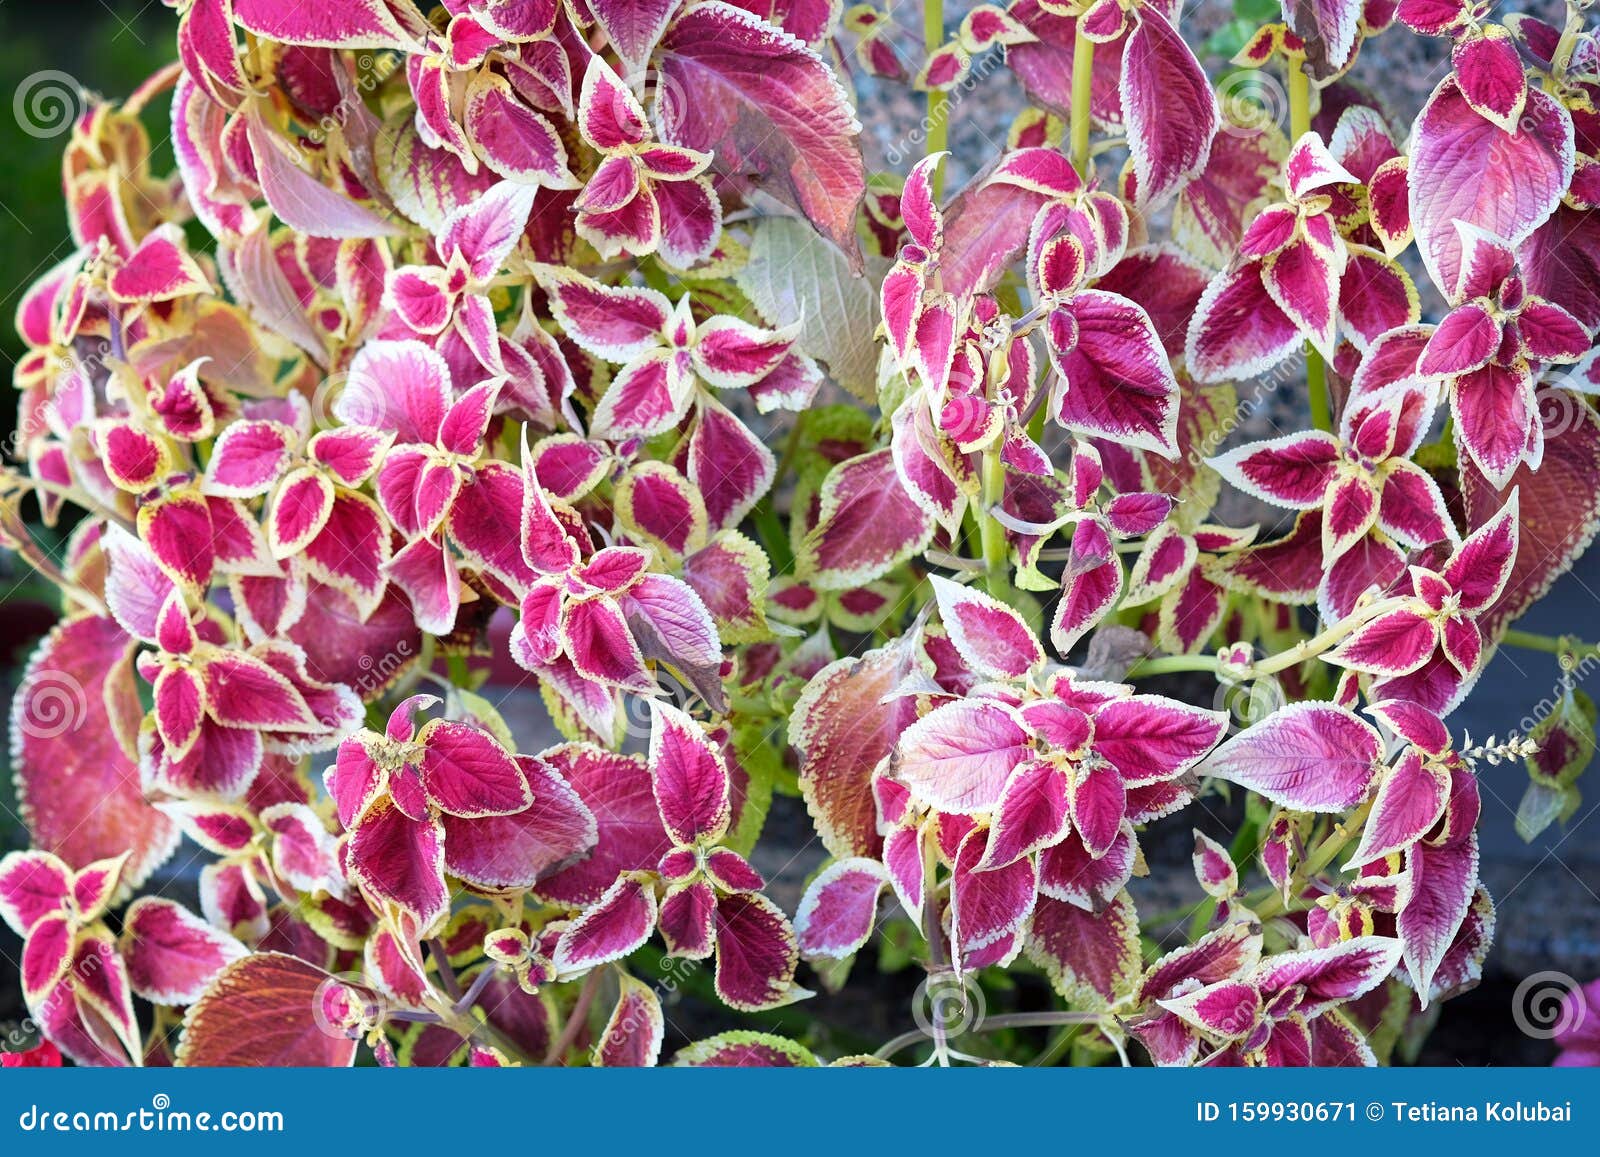 Coleus Blumei Is A Perennial Flower With Red Leaves In The Middle Stock Image Image Of Leaf Horticulture 159930671